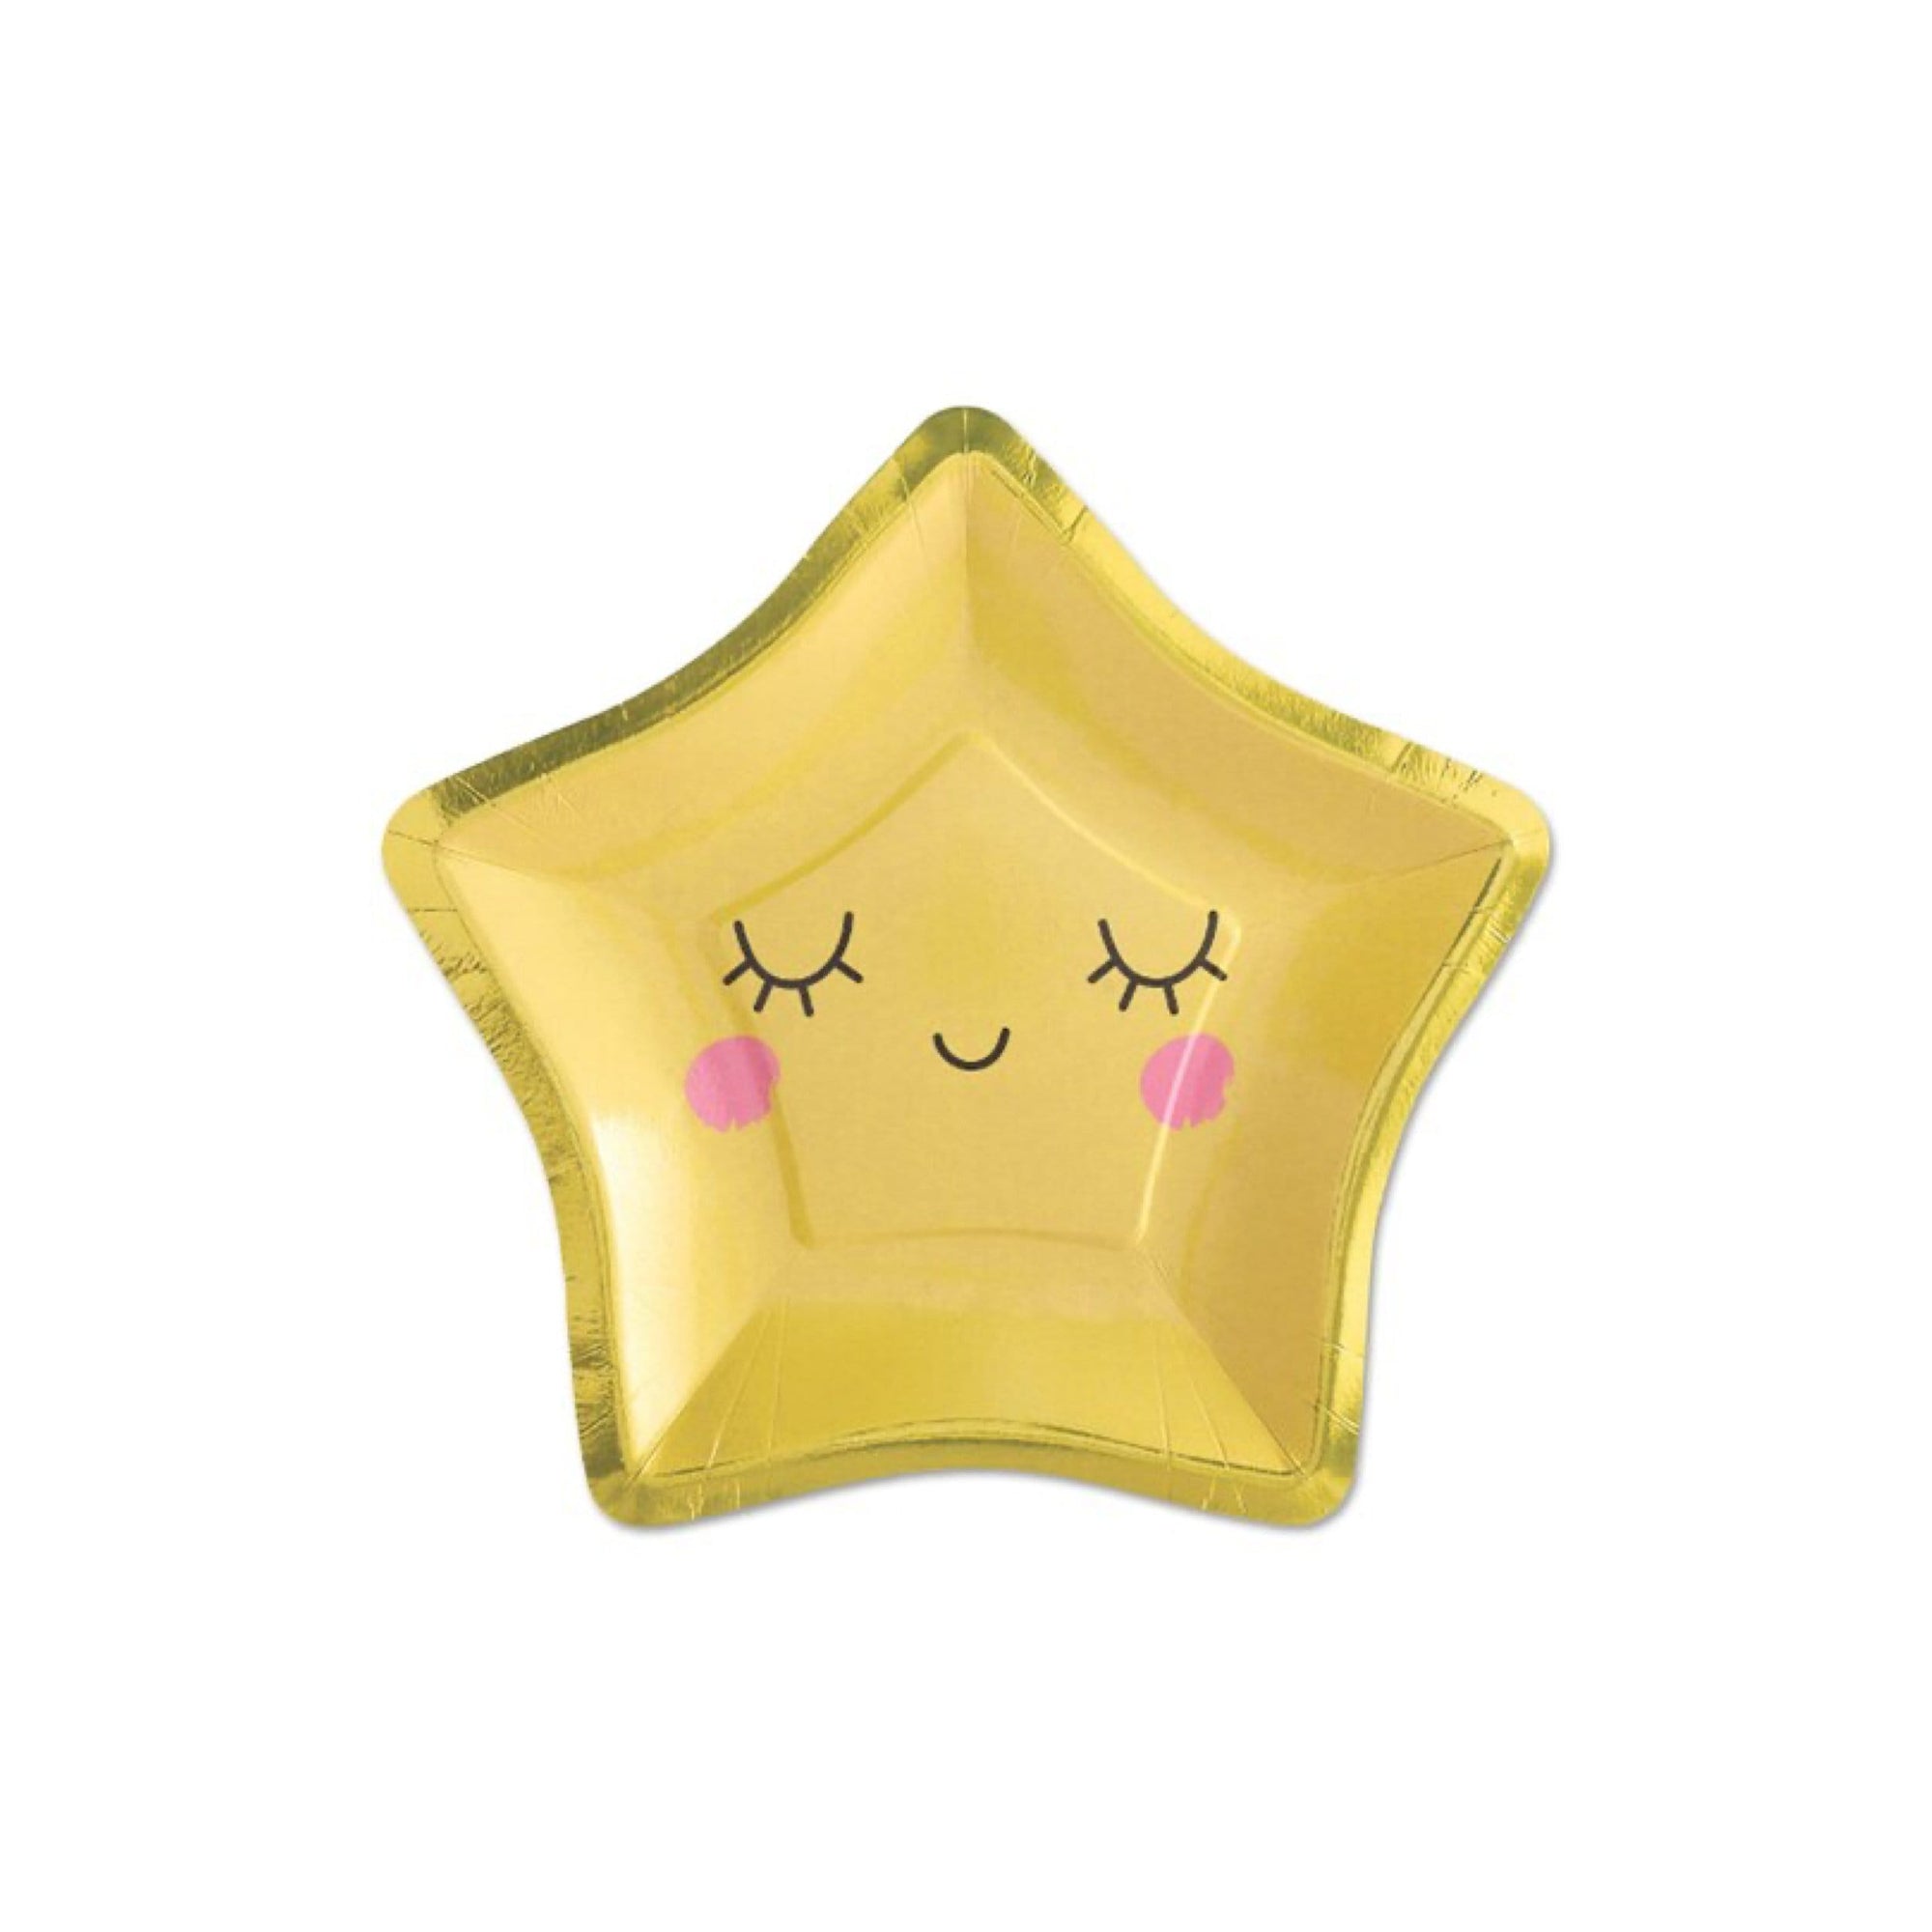 Smiling Star Plates